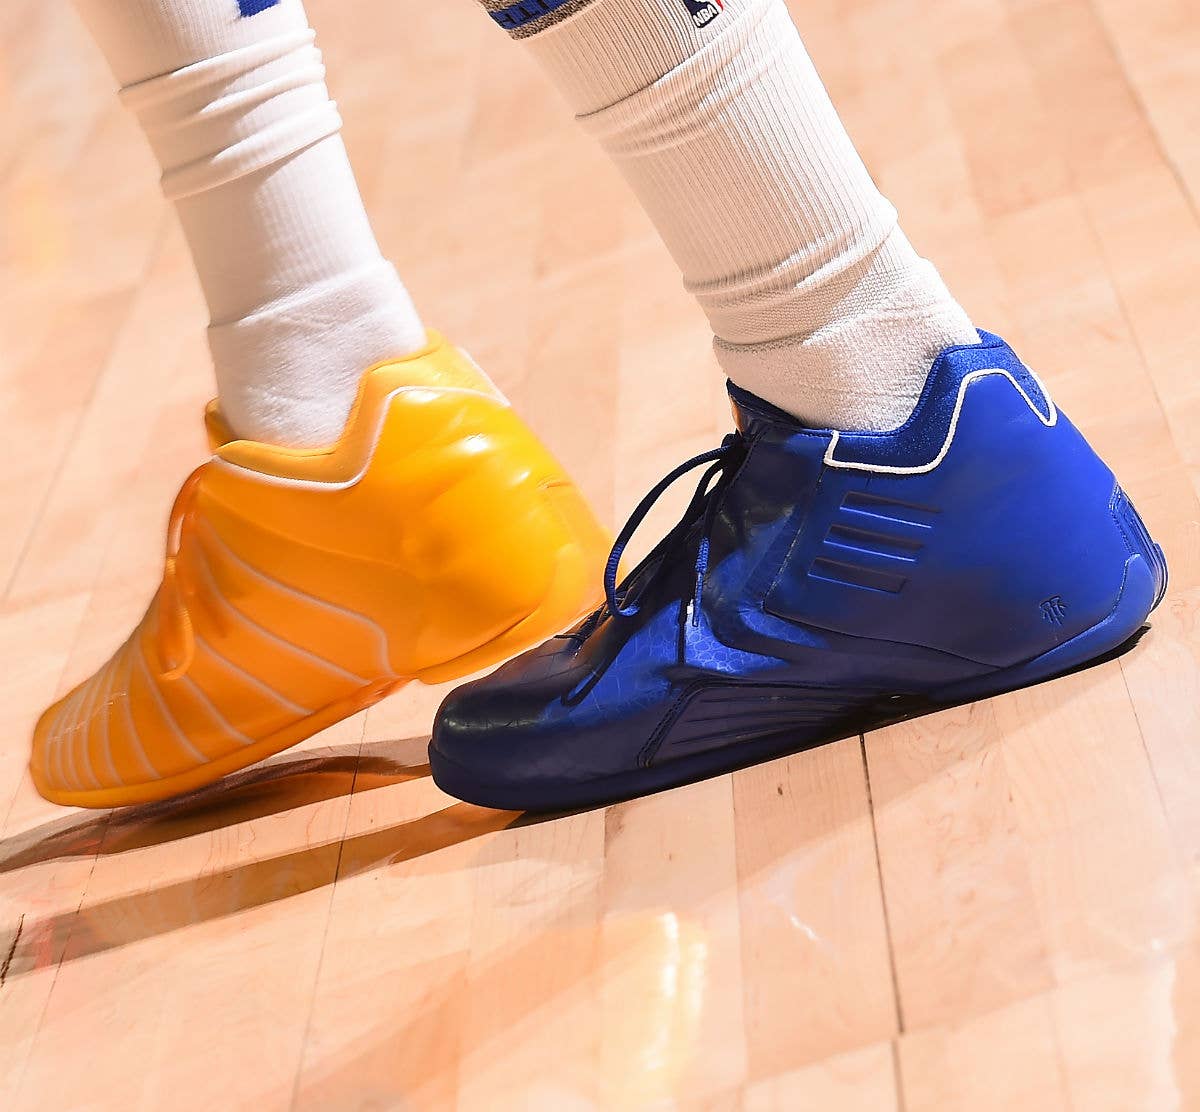 Nick Young Adidas TMac 3 Mismatched Warriors PE On Foot